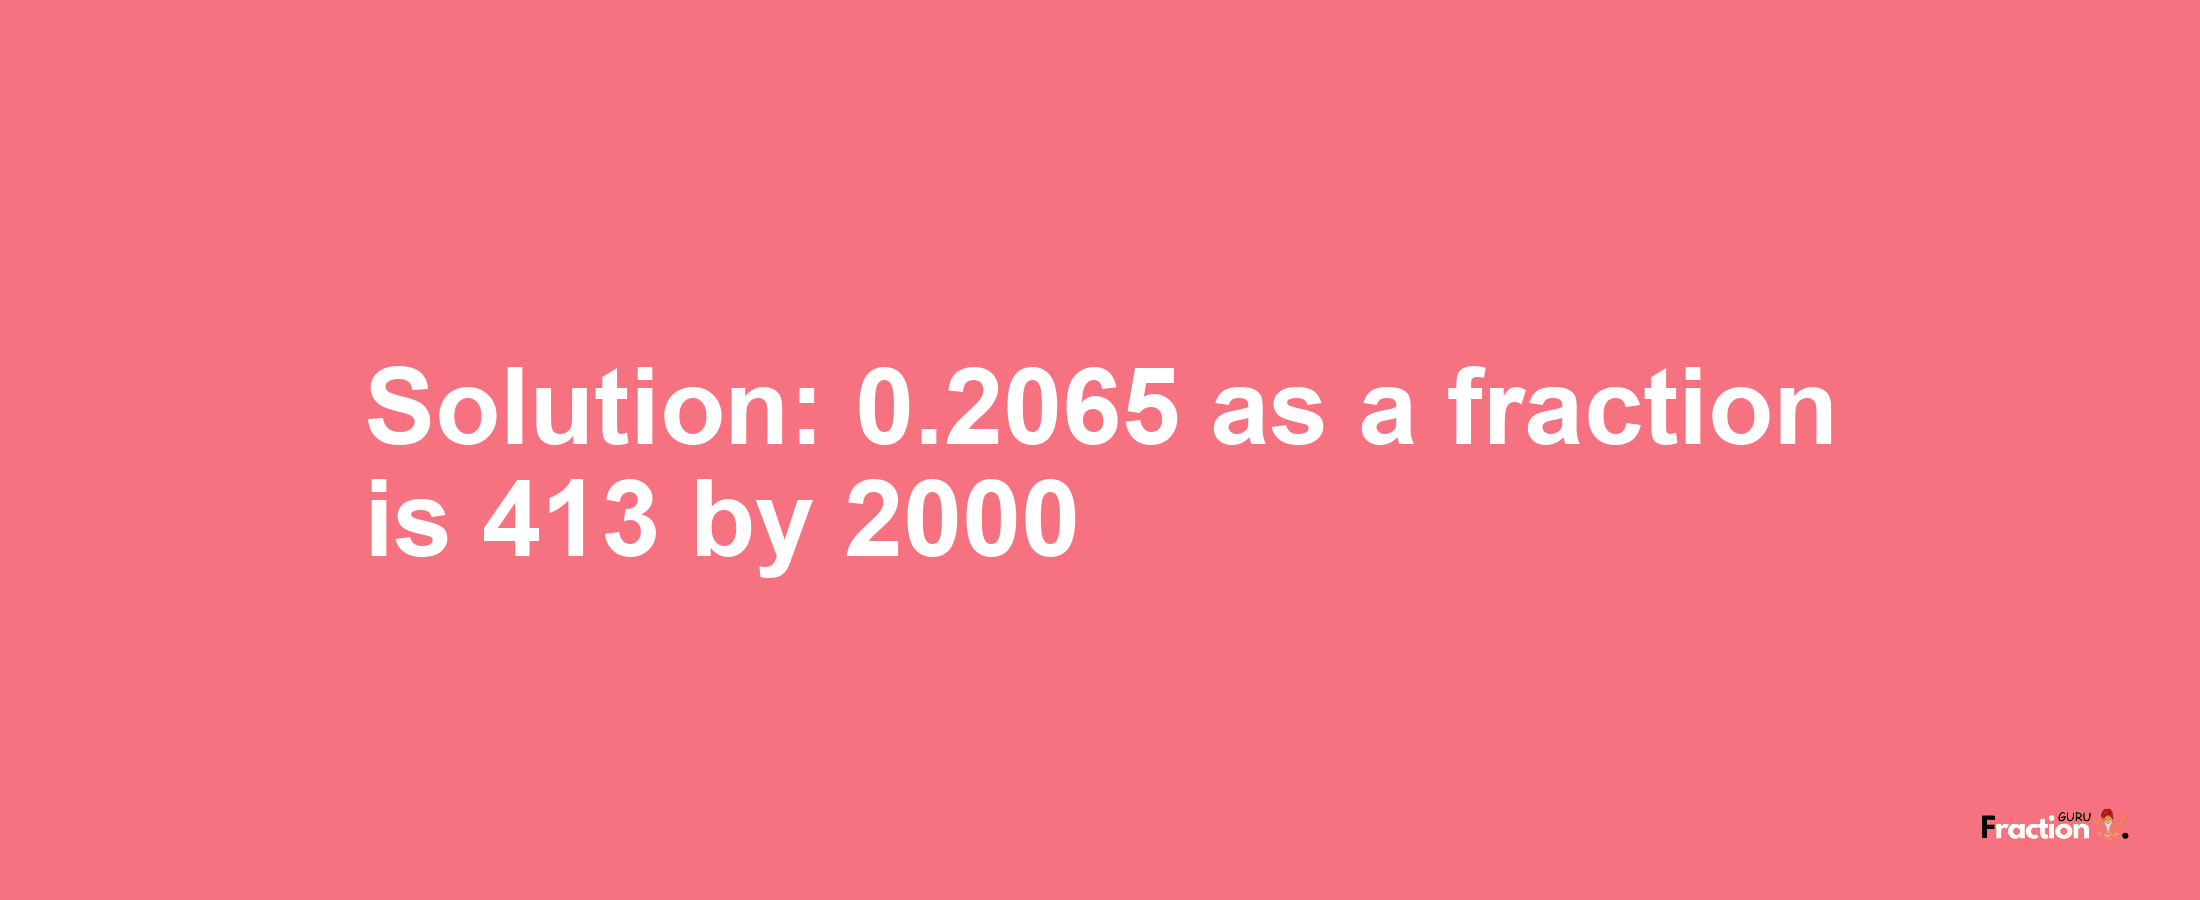 Solution:0.2065 as a fraction is 413/2000